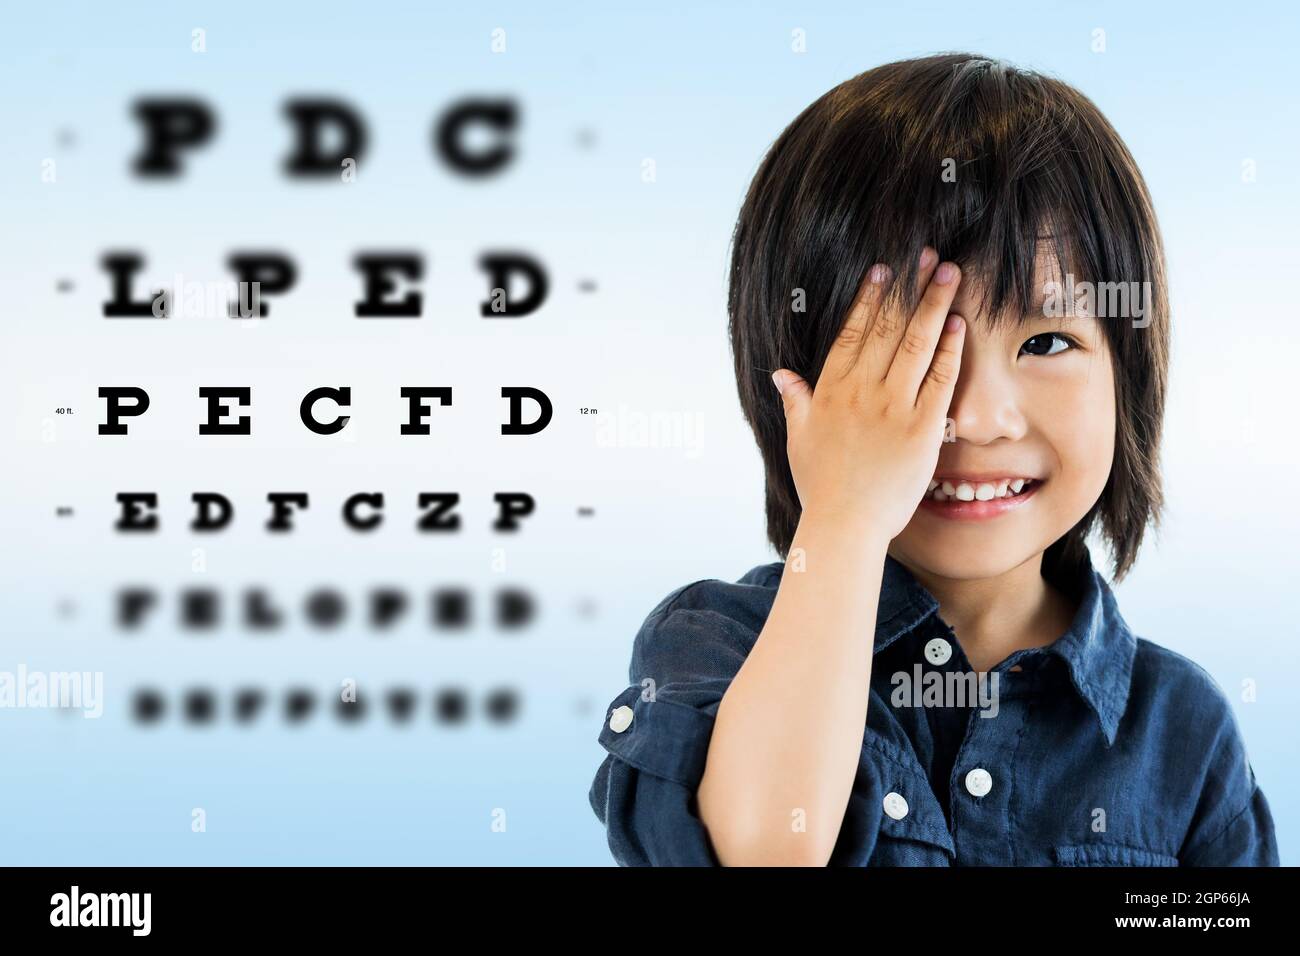 Close up portrait of cute little asian boy doing eye test.Kid closing one eye with hand against alphabetical out of focus test chart in background. Stock Photo